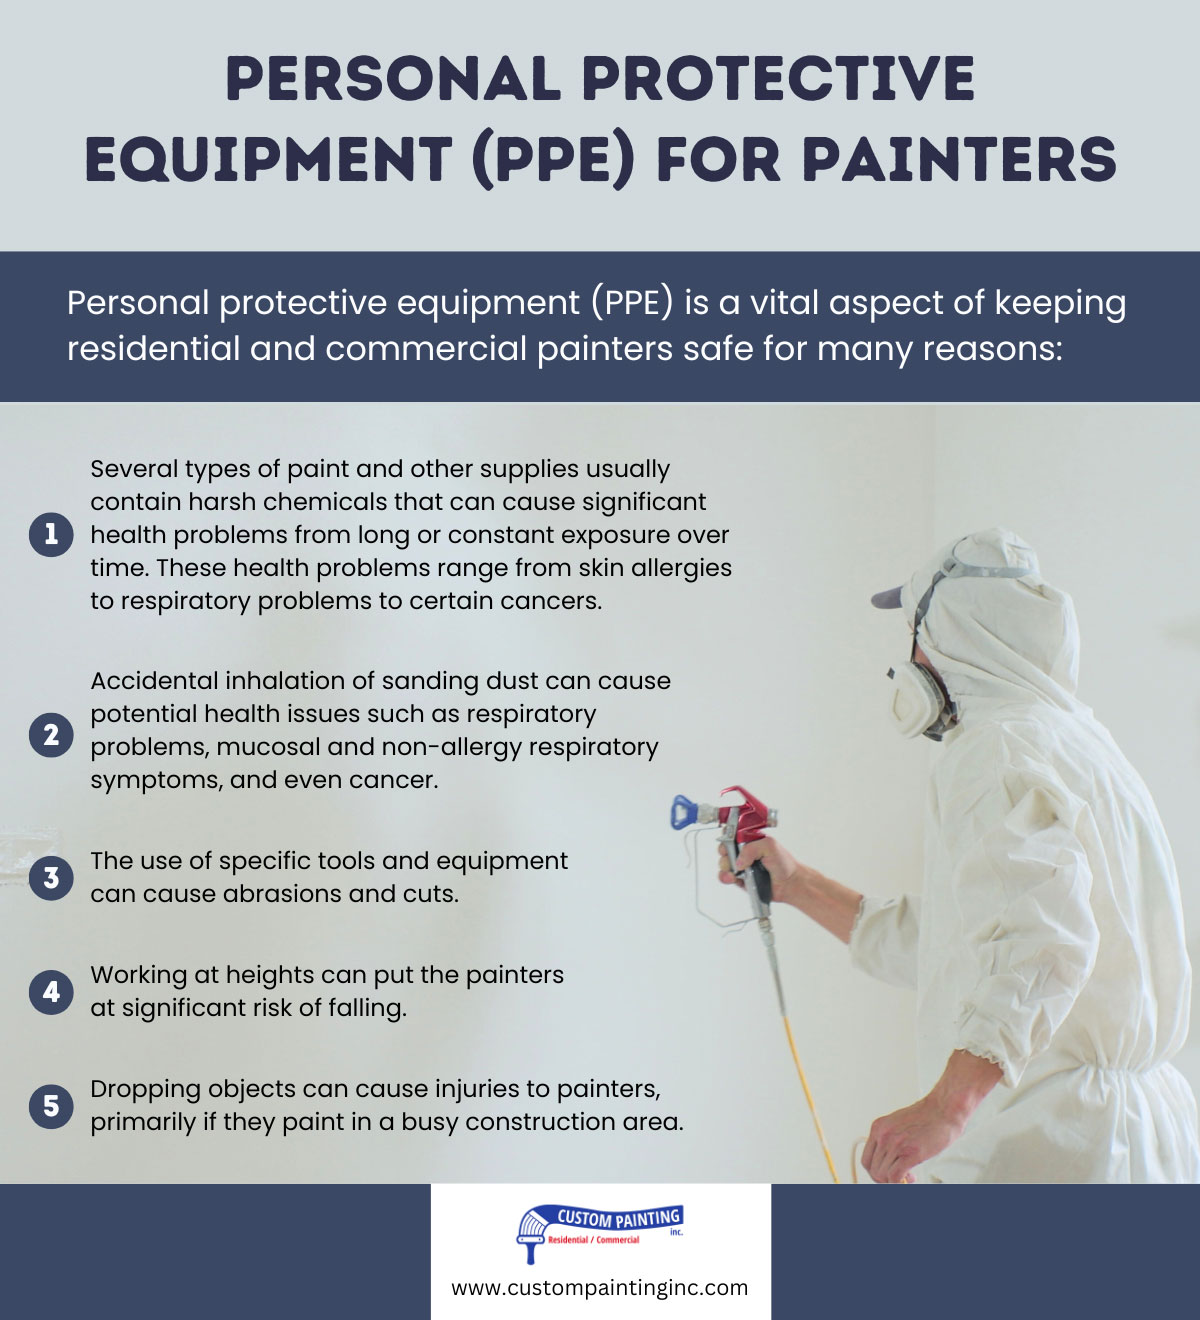 Personal protective equipment (PPE) for painters